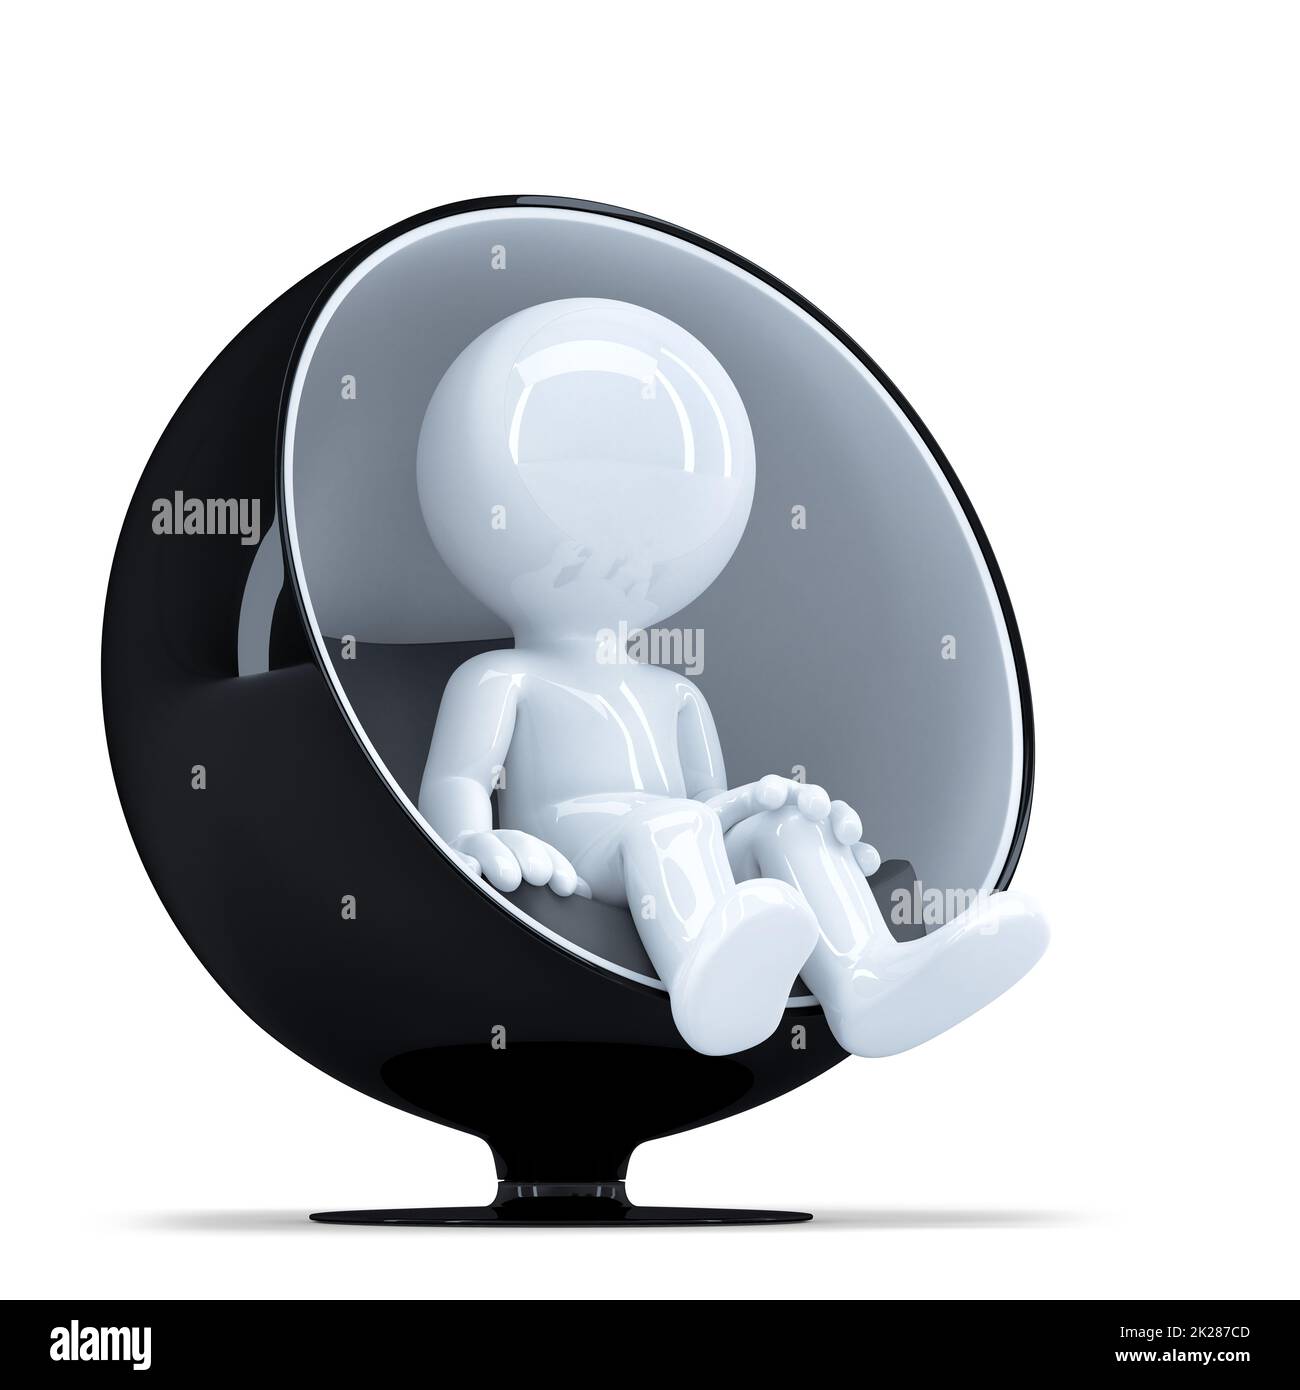 3d Man sitting on the stylish round chair Stock Photo